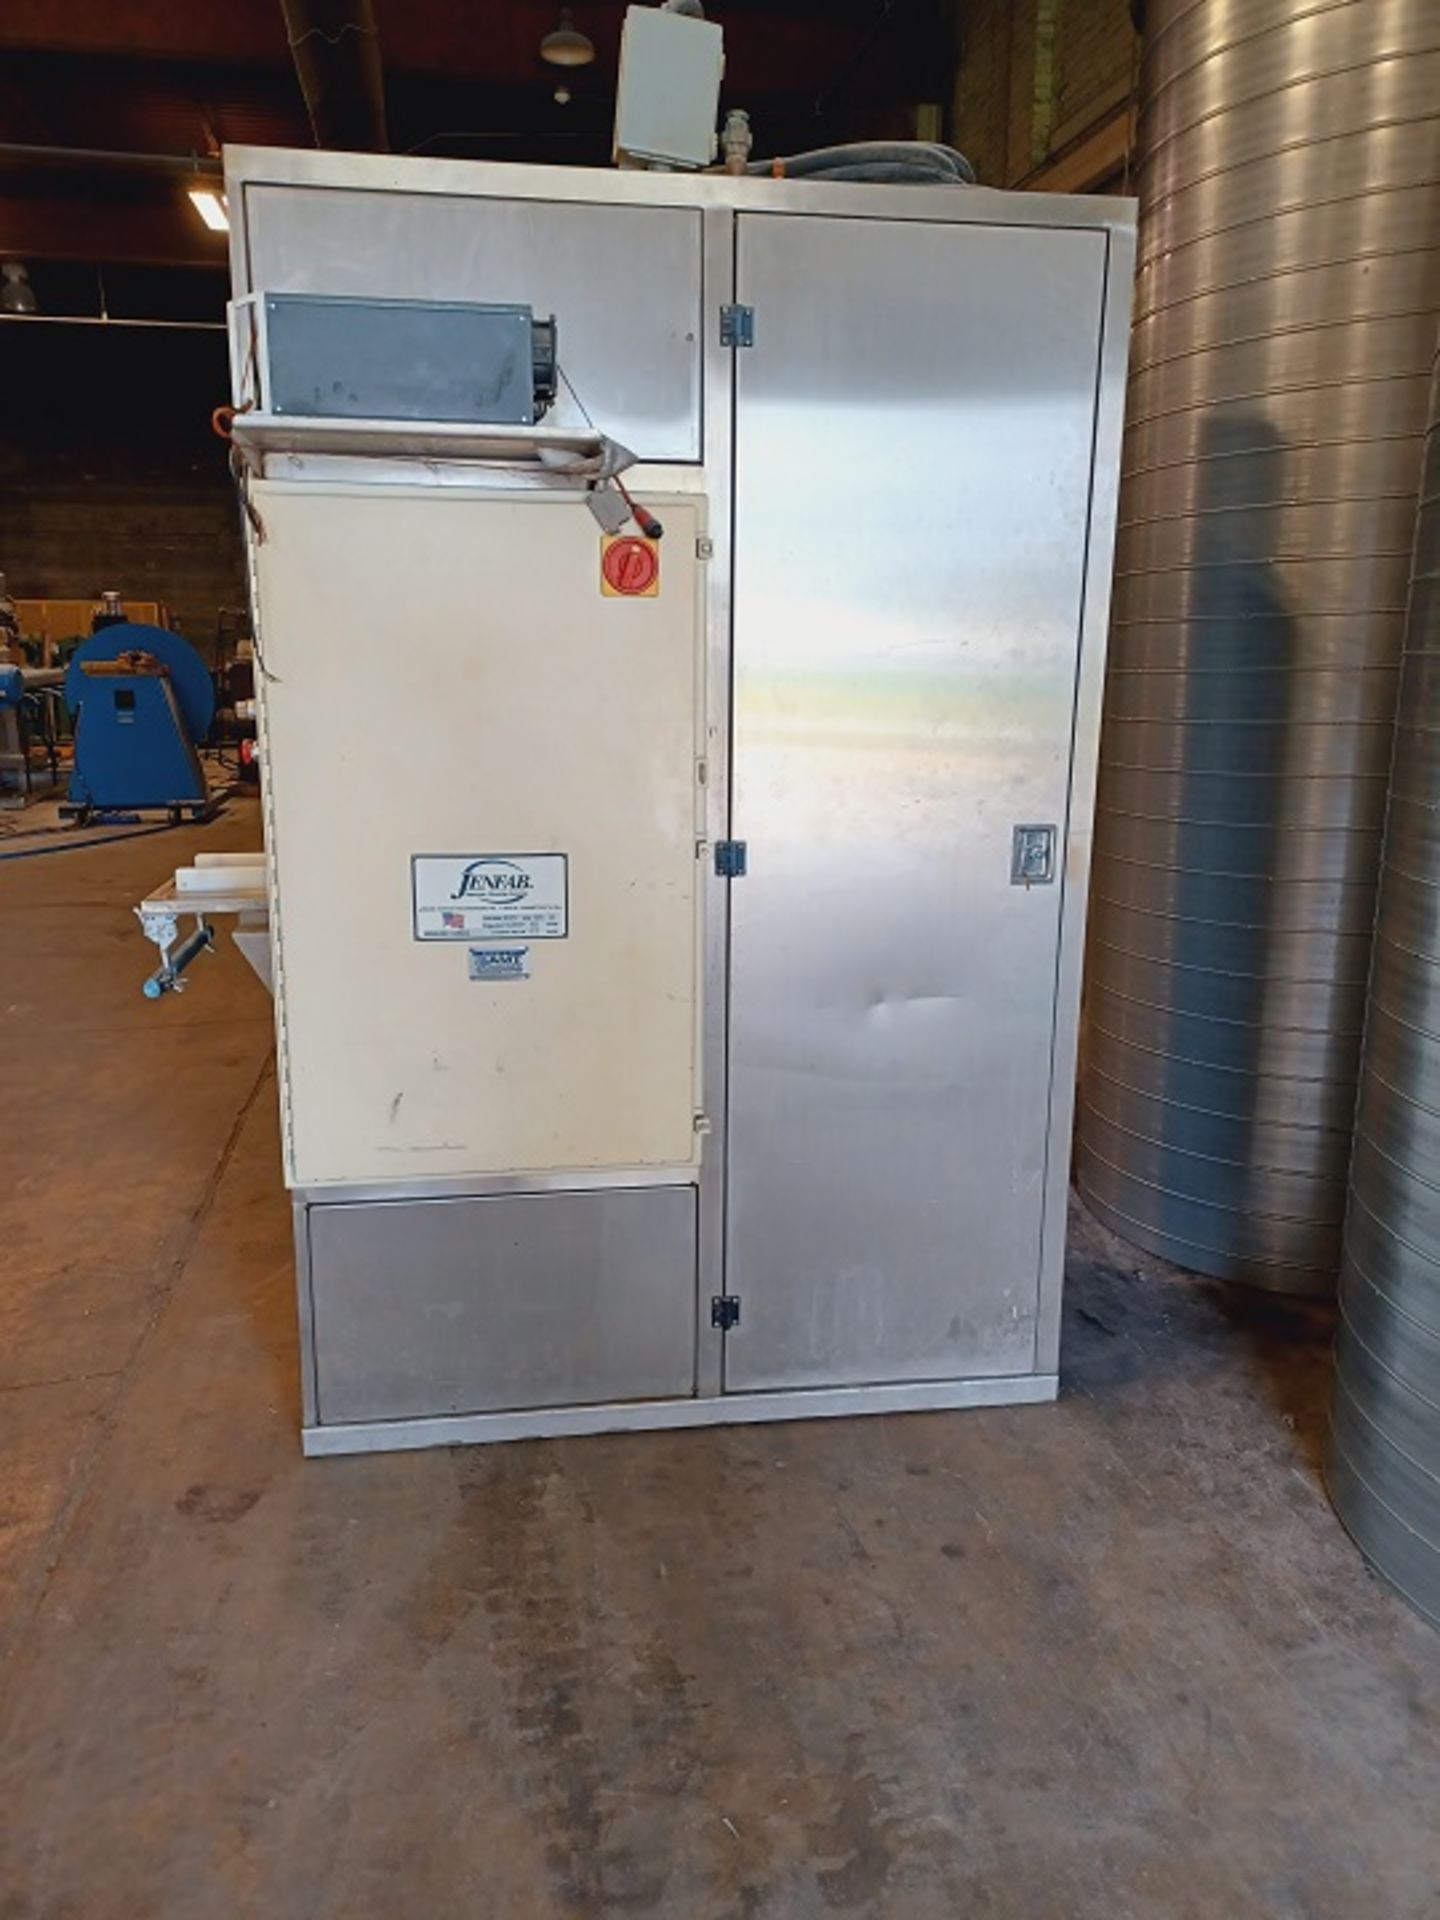 JenFab Aqueous Cleaning System, 6.5" X 12" Opening, Branson Sono Module Control - Image 4 of 5